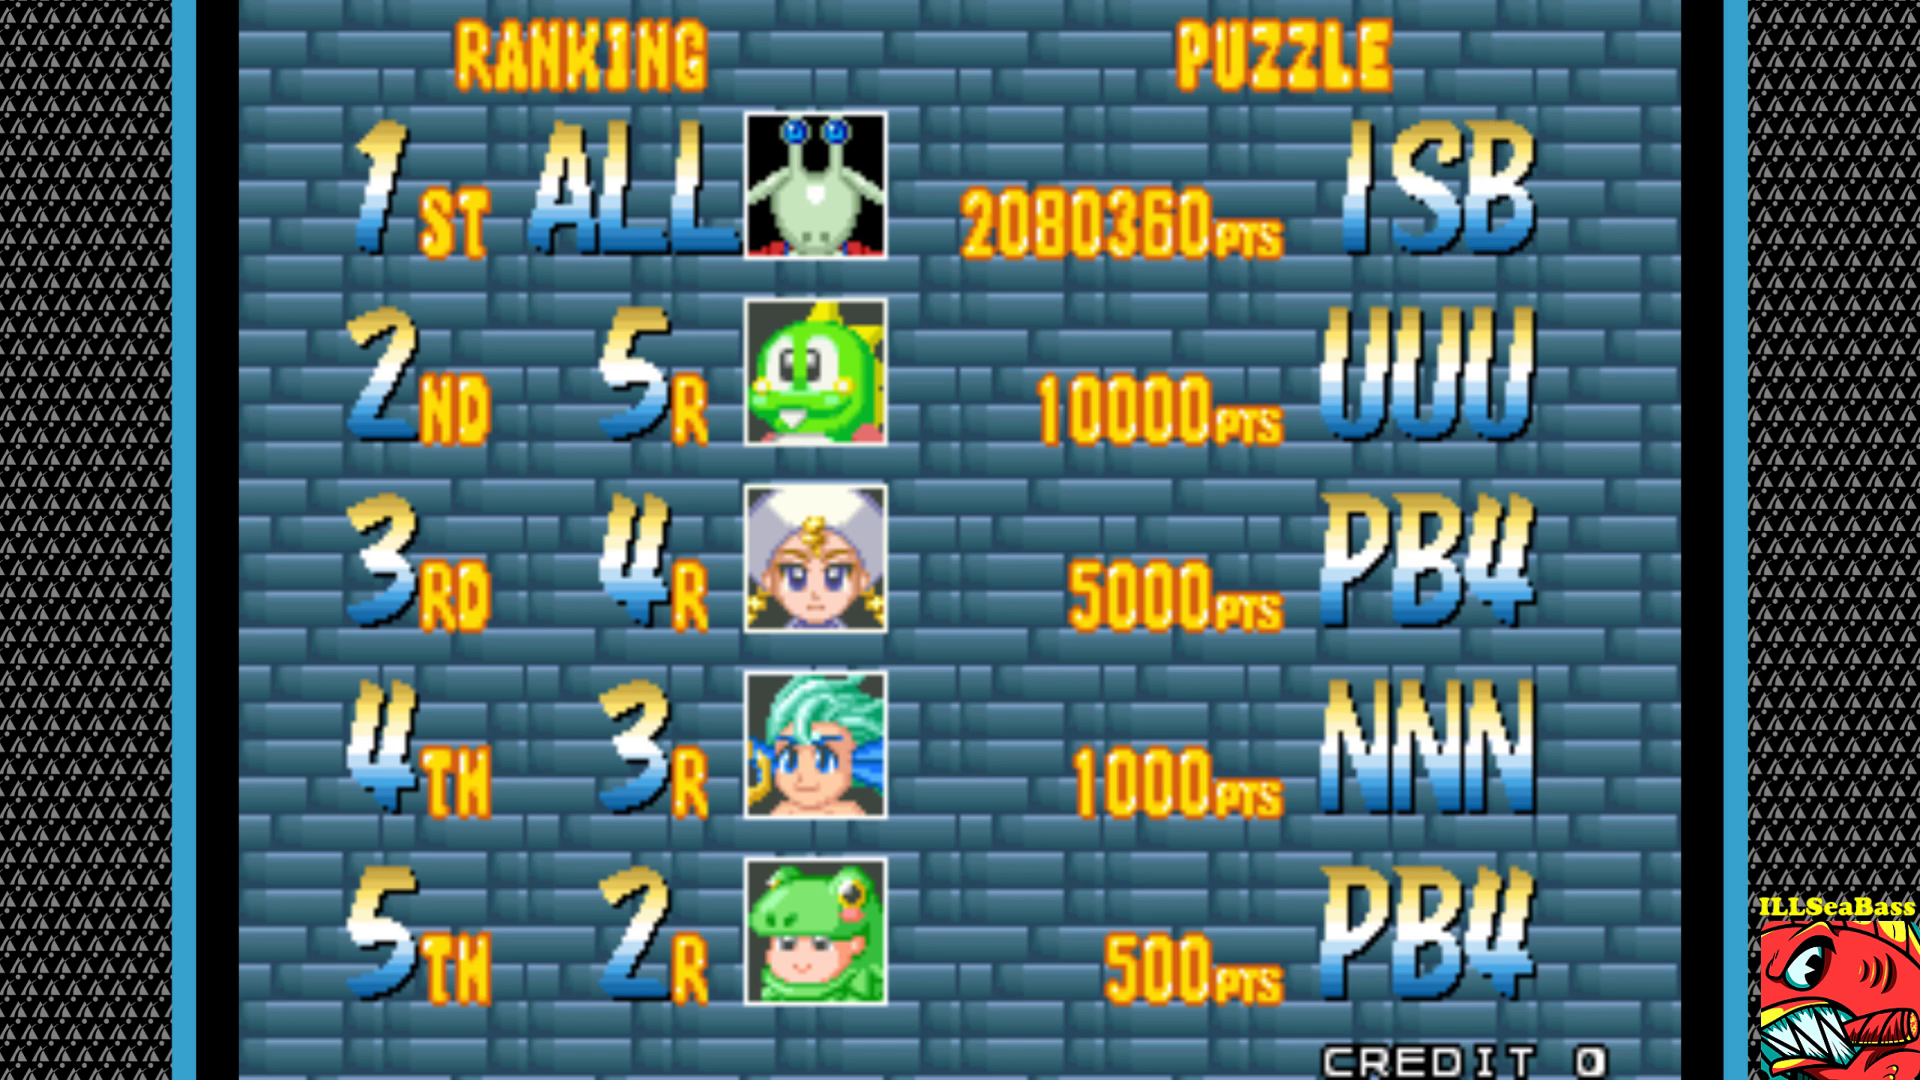 ILLSeaBass: Puzzle Bobble 4 [Puzzle Mode/Easy] [pbobble4] (Arcade Emulated / M.A.M.E.) 2,080,360 points on 2017-09-23 14:11:18